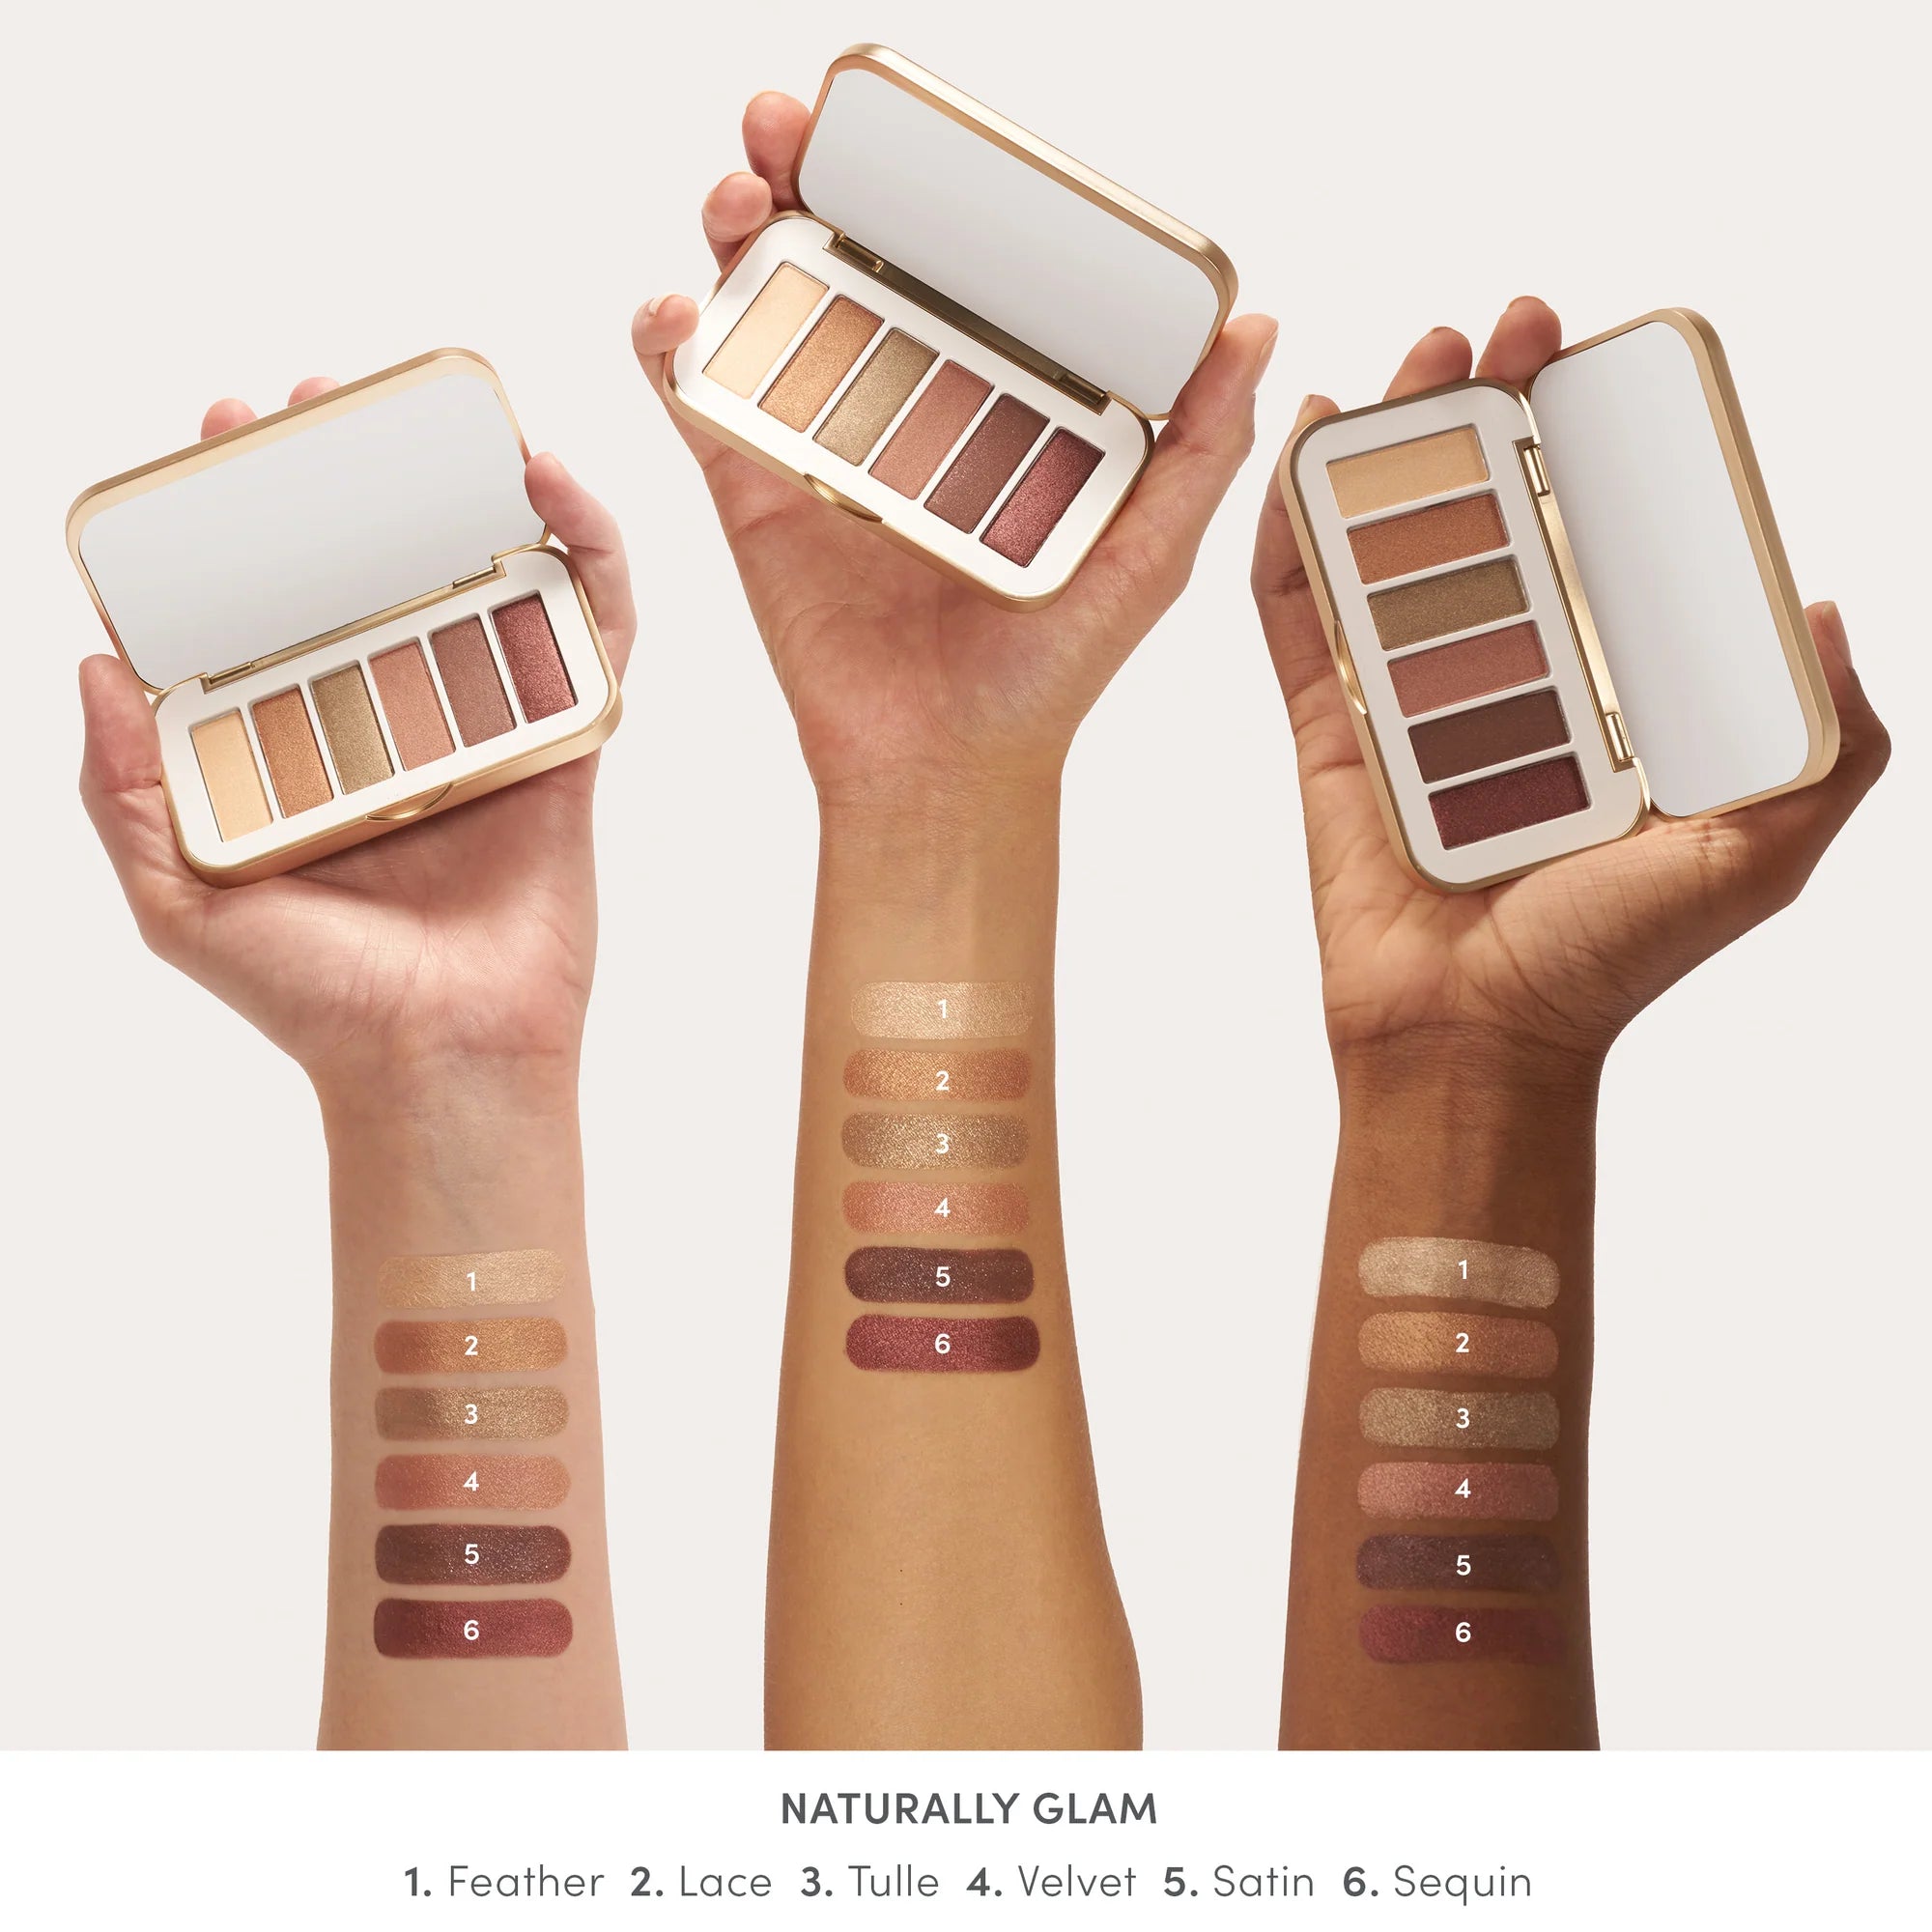 Jane Iredale's PurePressed® Eye Shadow Palette - shade Naturally Glam - Feather, Lace, Tulle, Velvet, Satin, Sequin swatches